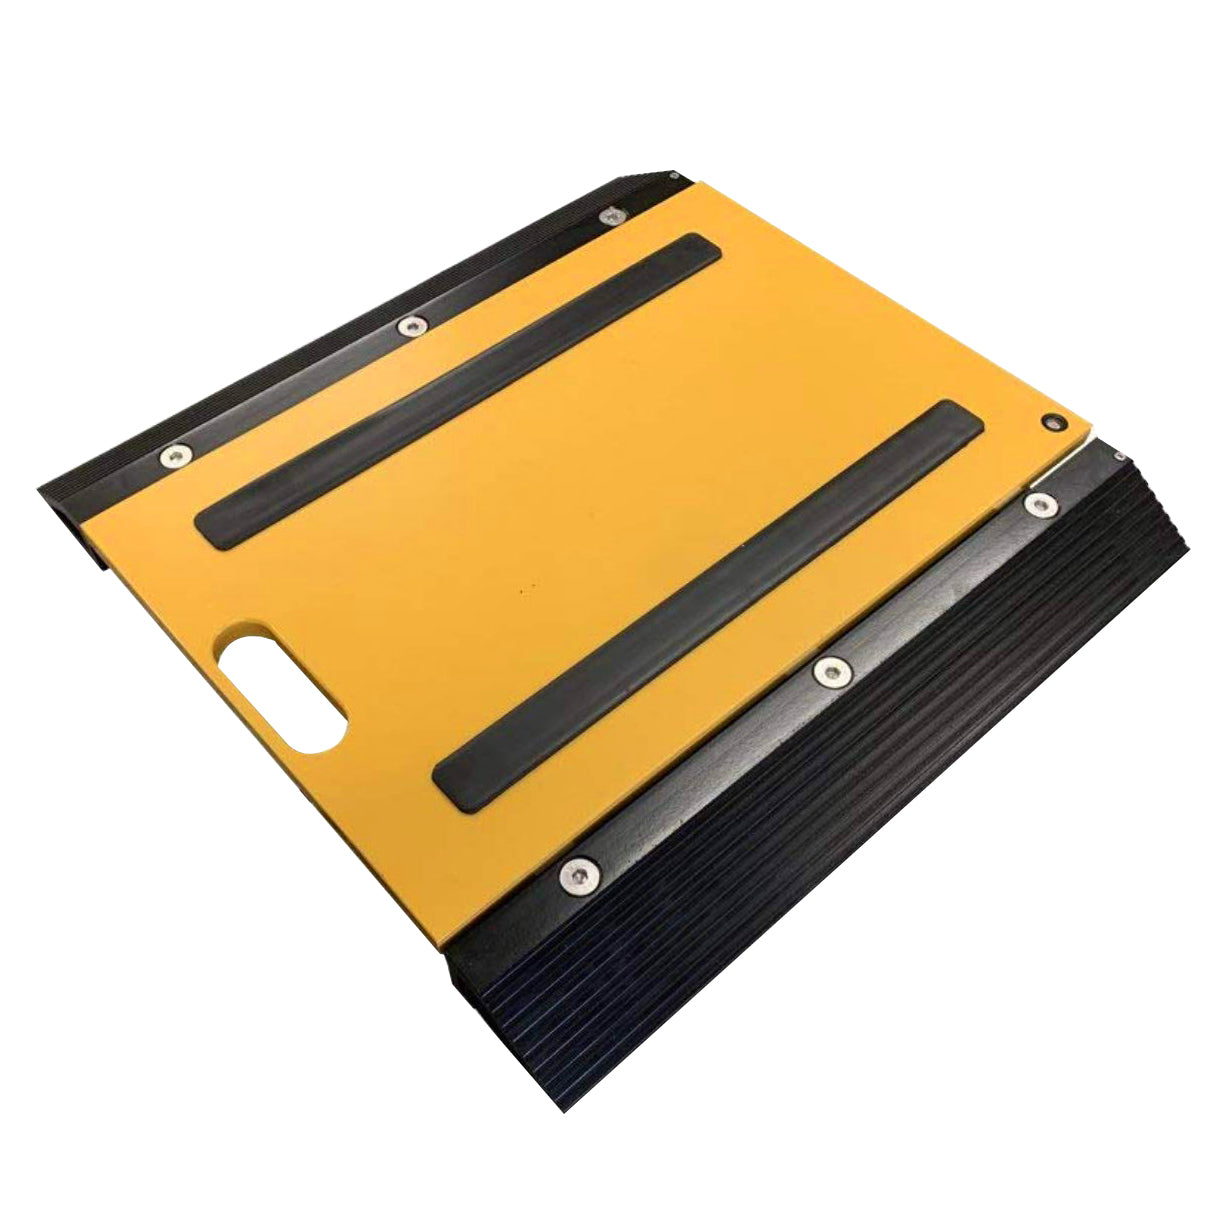 Axle Weighing Pads/Vehicles Scale/Truck/Car Scales, Aluminum Heavy-Duty Construction, Accurate Indicator with Built-in Printer